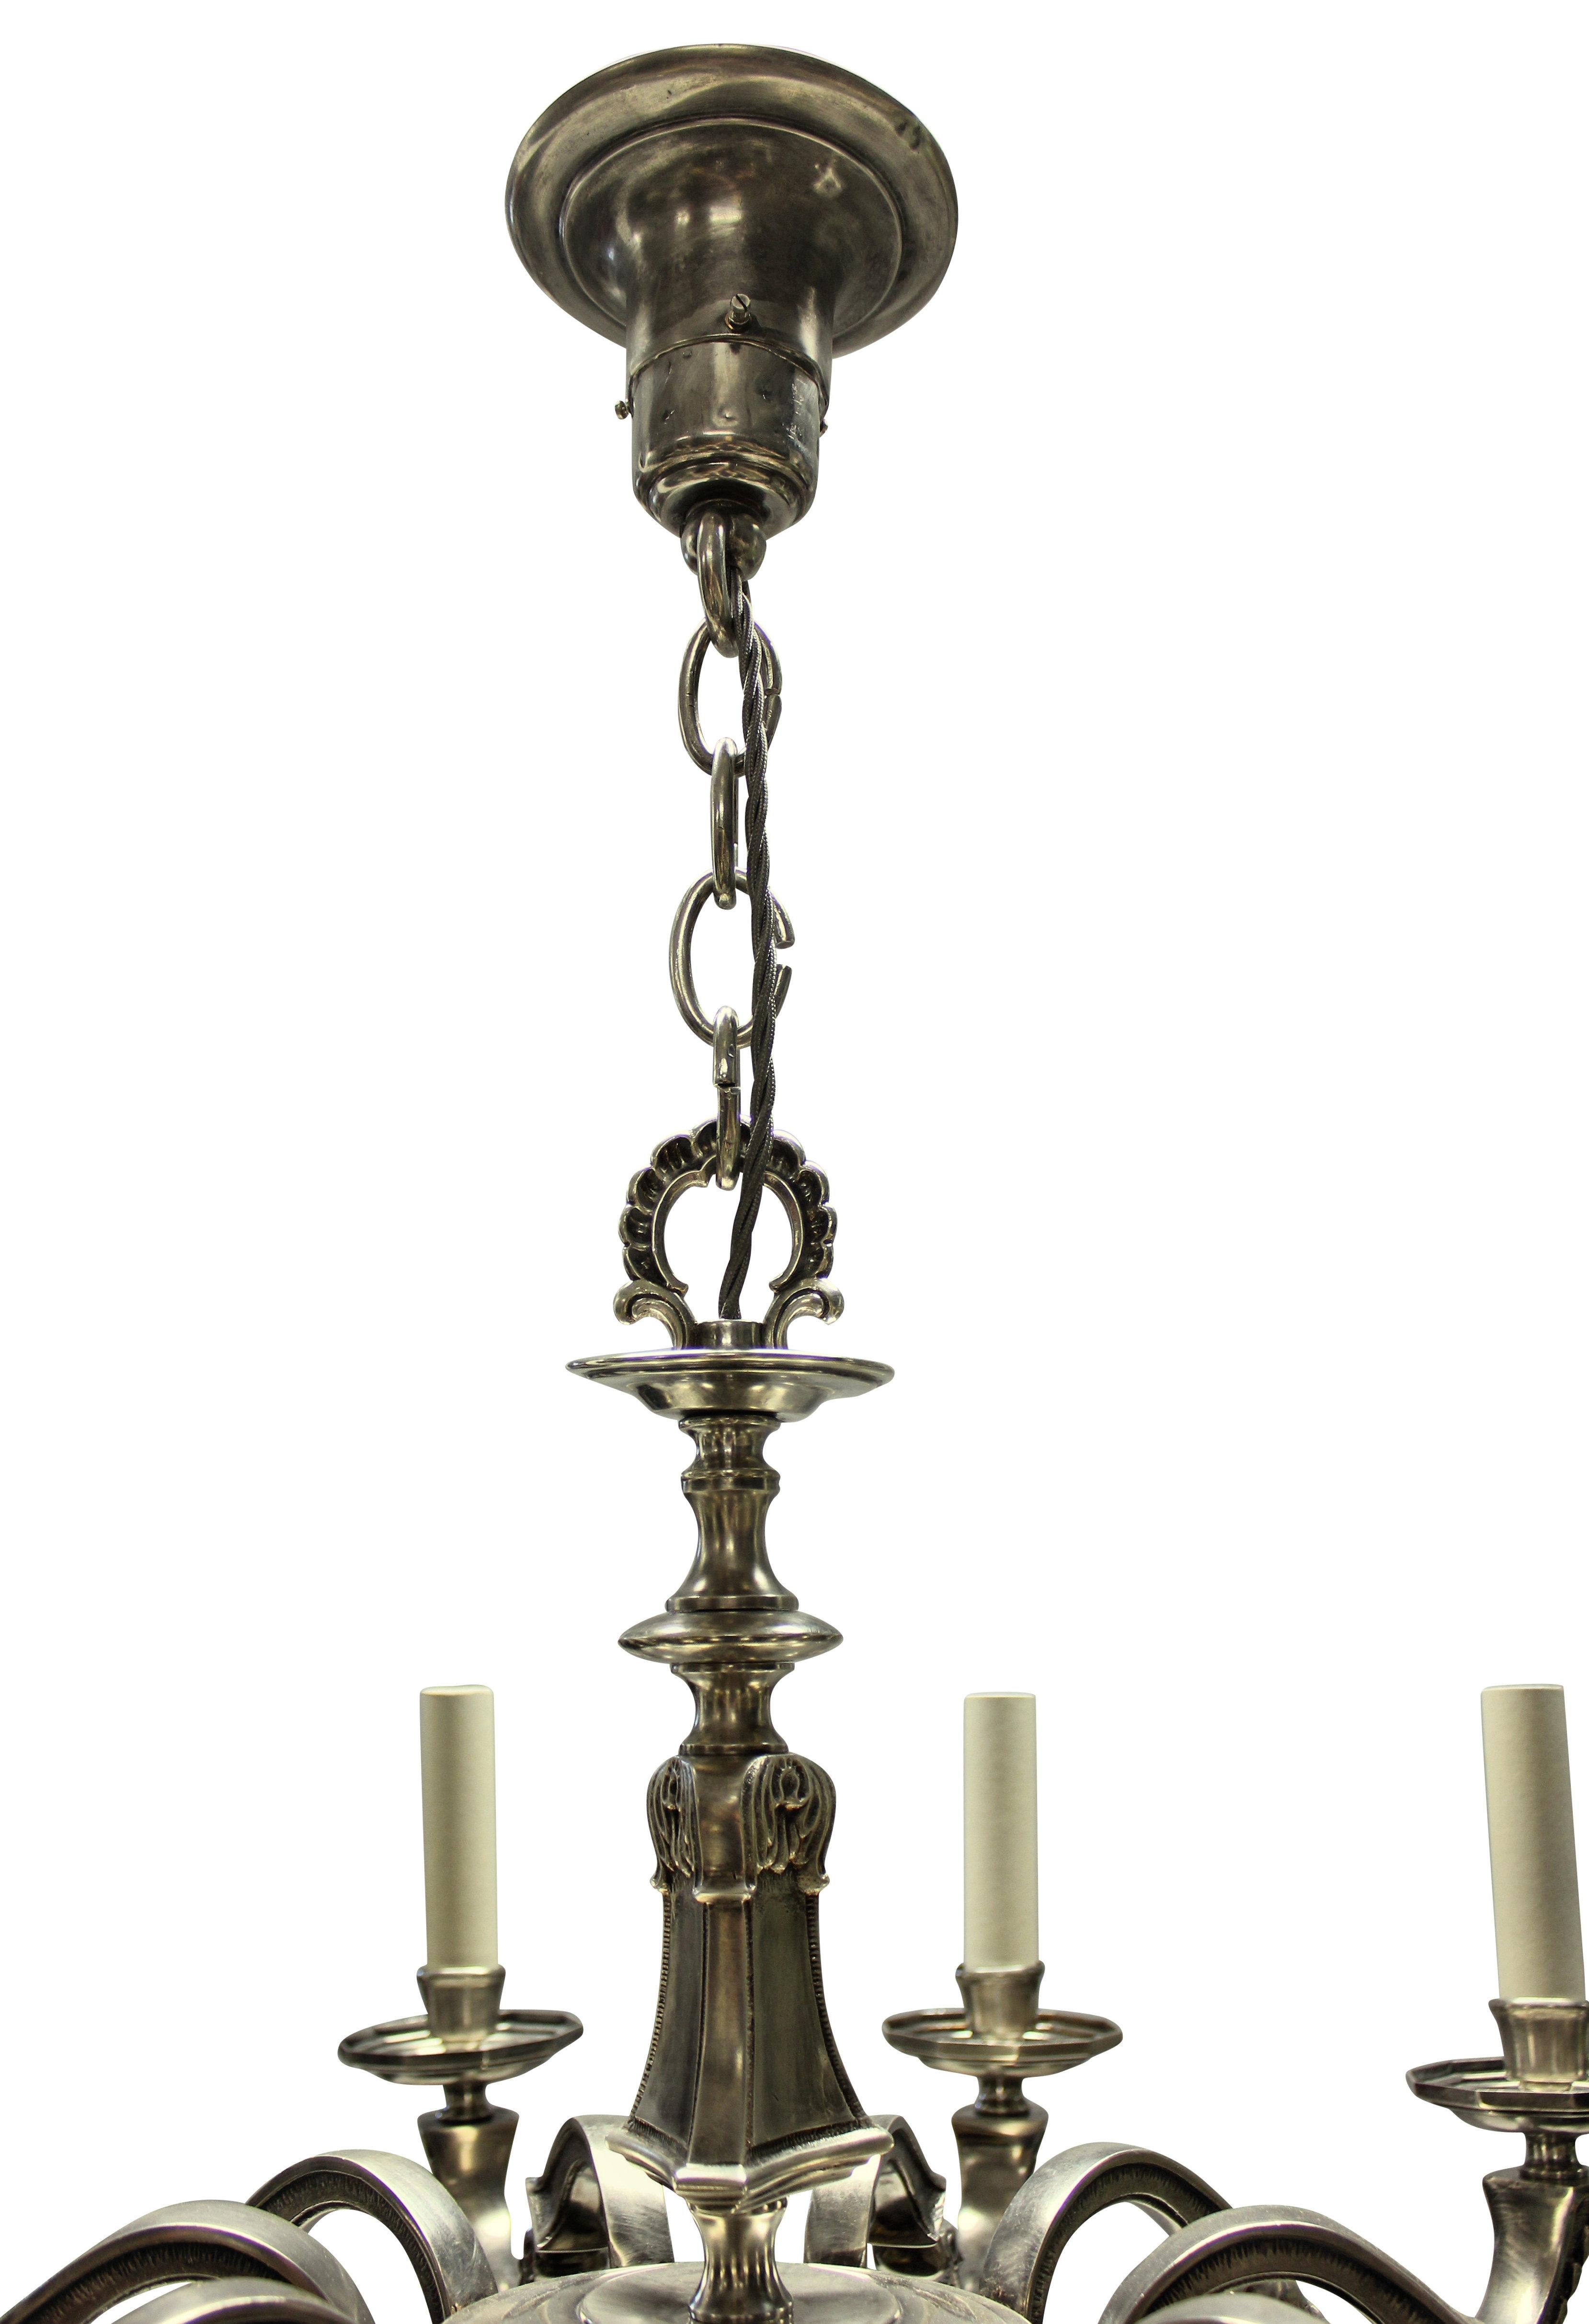 An English neo-classical ten branch silver plated chandelier, which is shallow and suitable for lower ceilings.